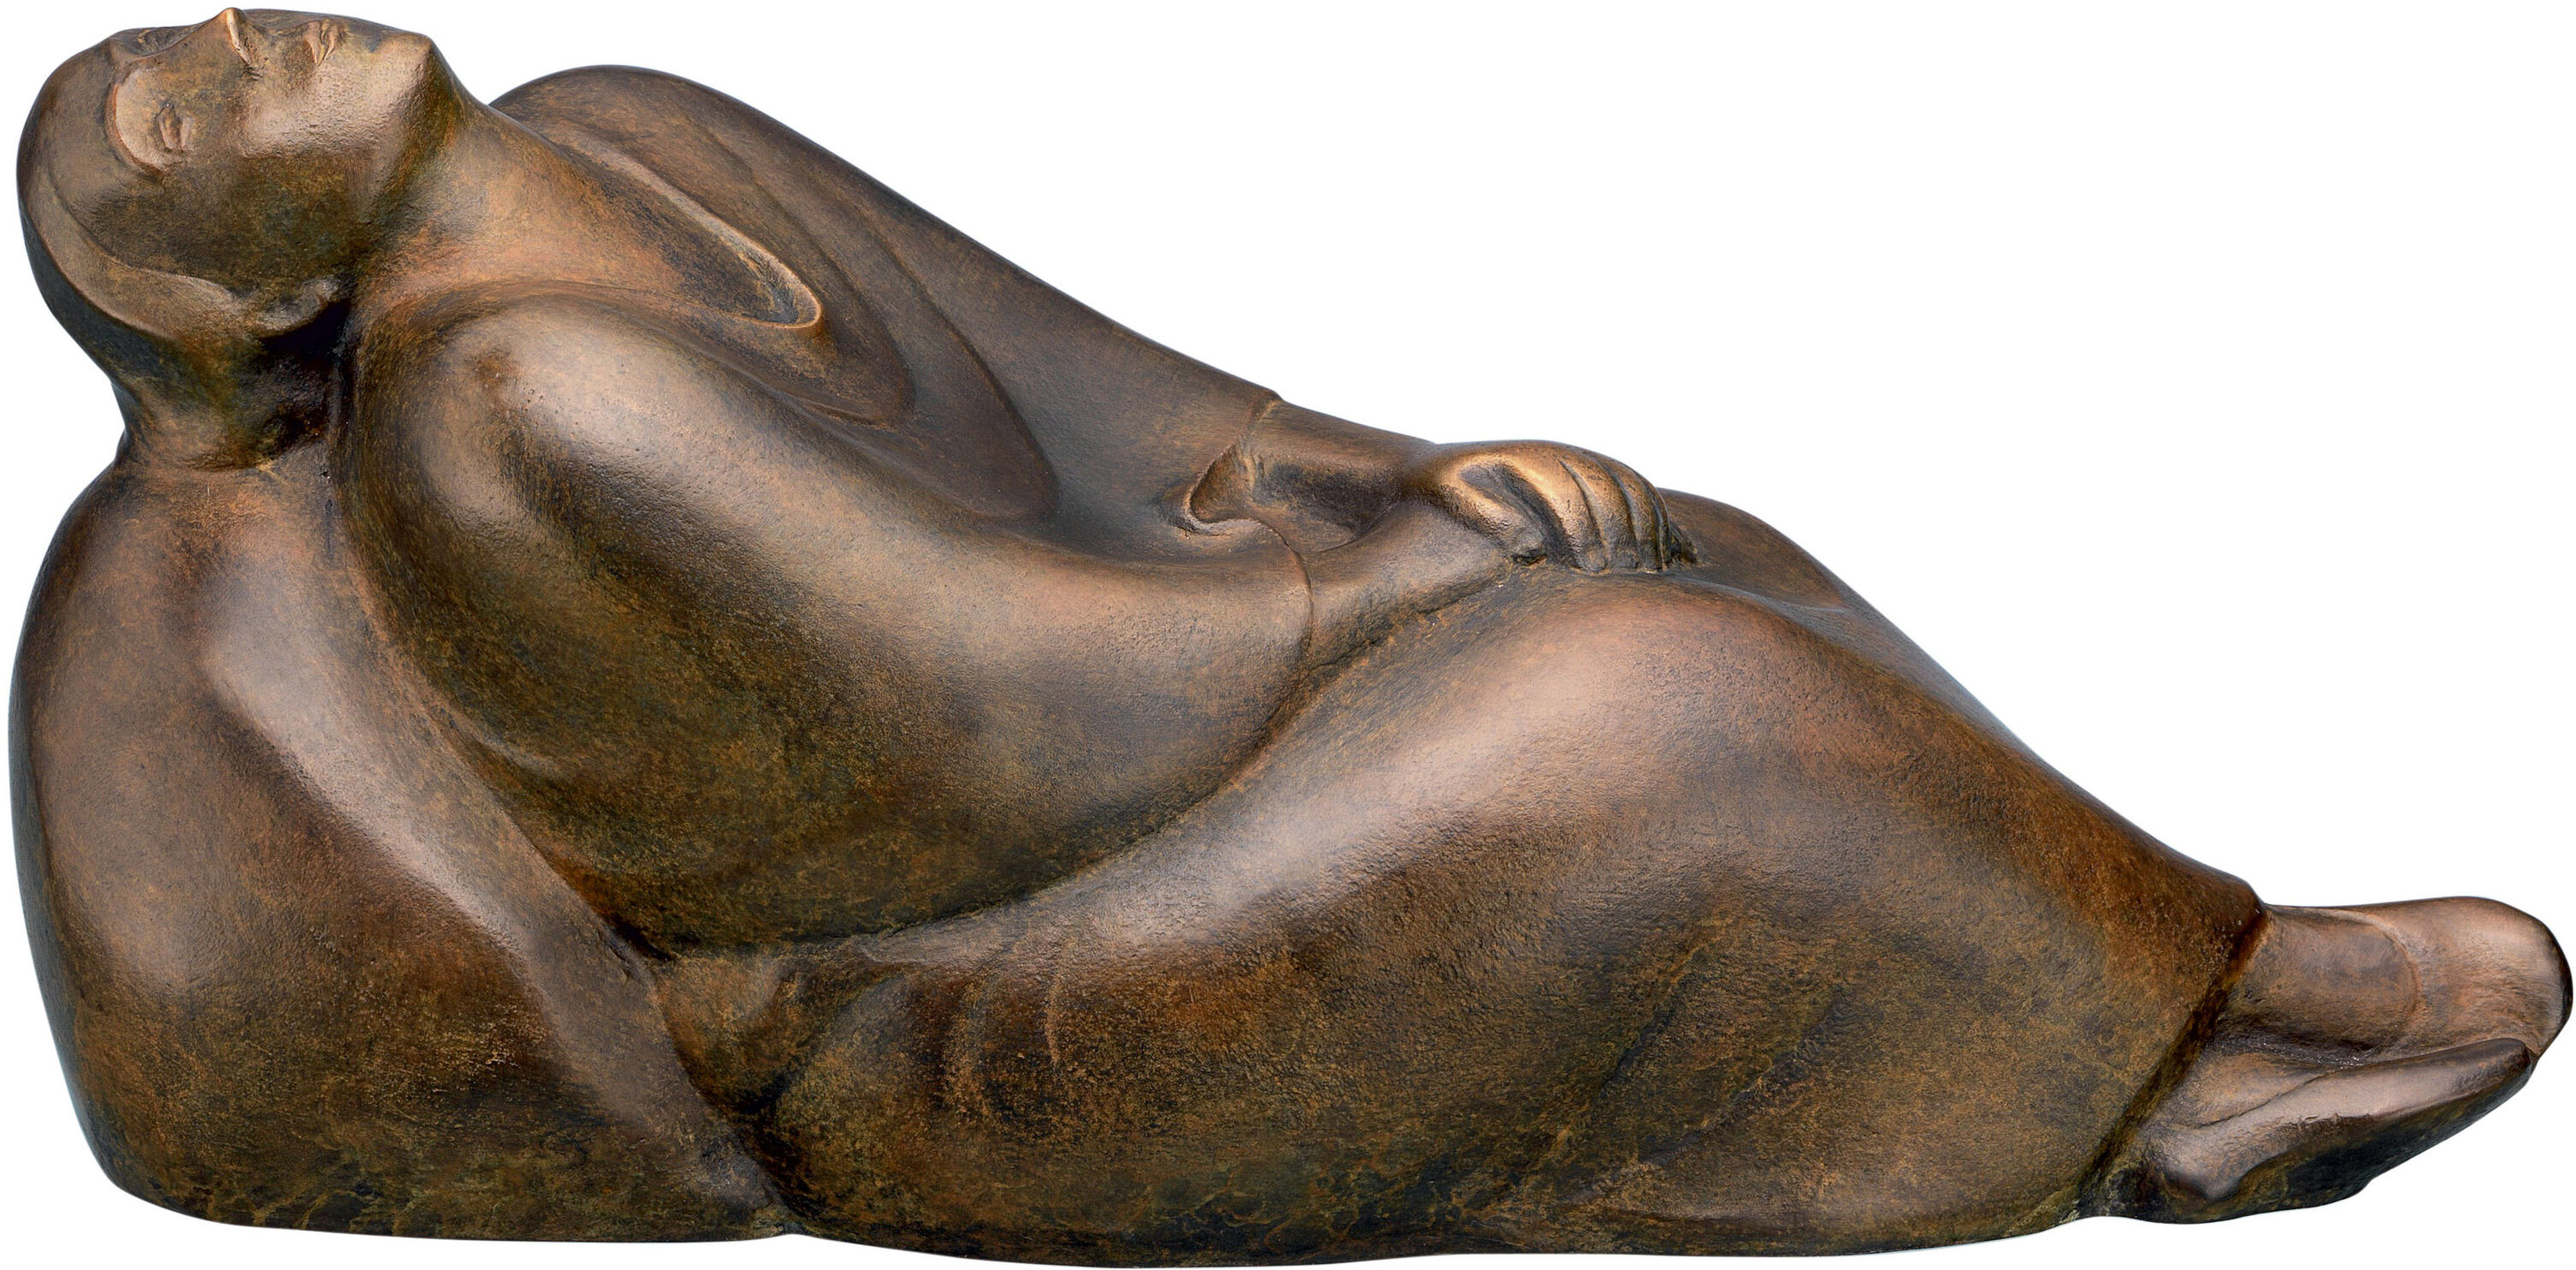 Sculpture "Dreaming Woman" (1912), bronze reduction by Ernst Barlach